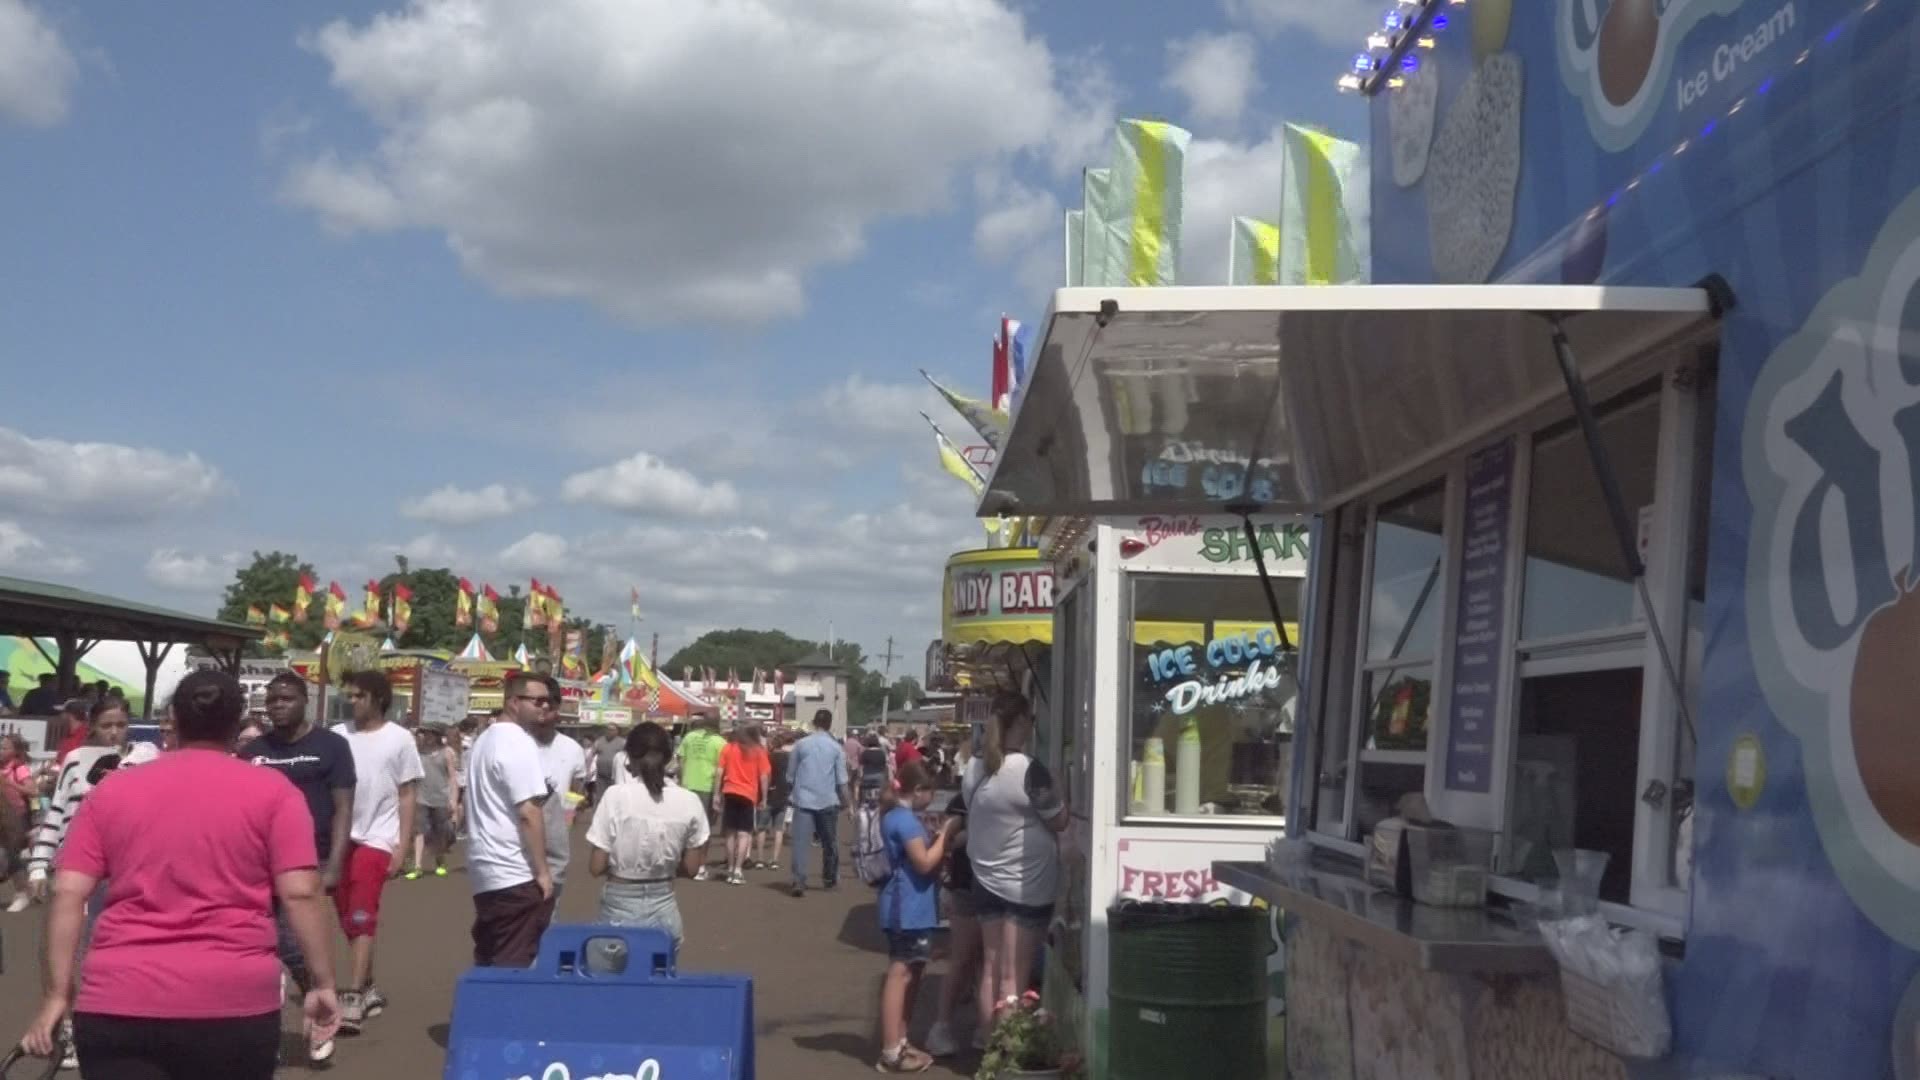 The Free Fair made its long-awaited return Friday after canceling last year’s event due to the pandemic.